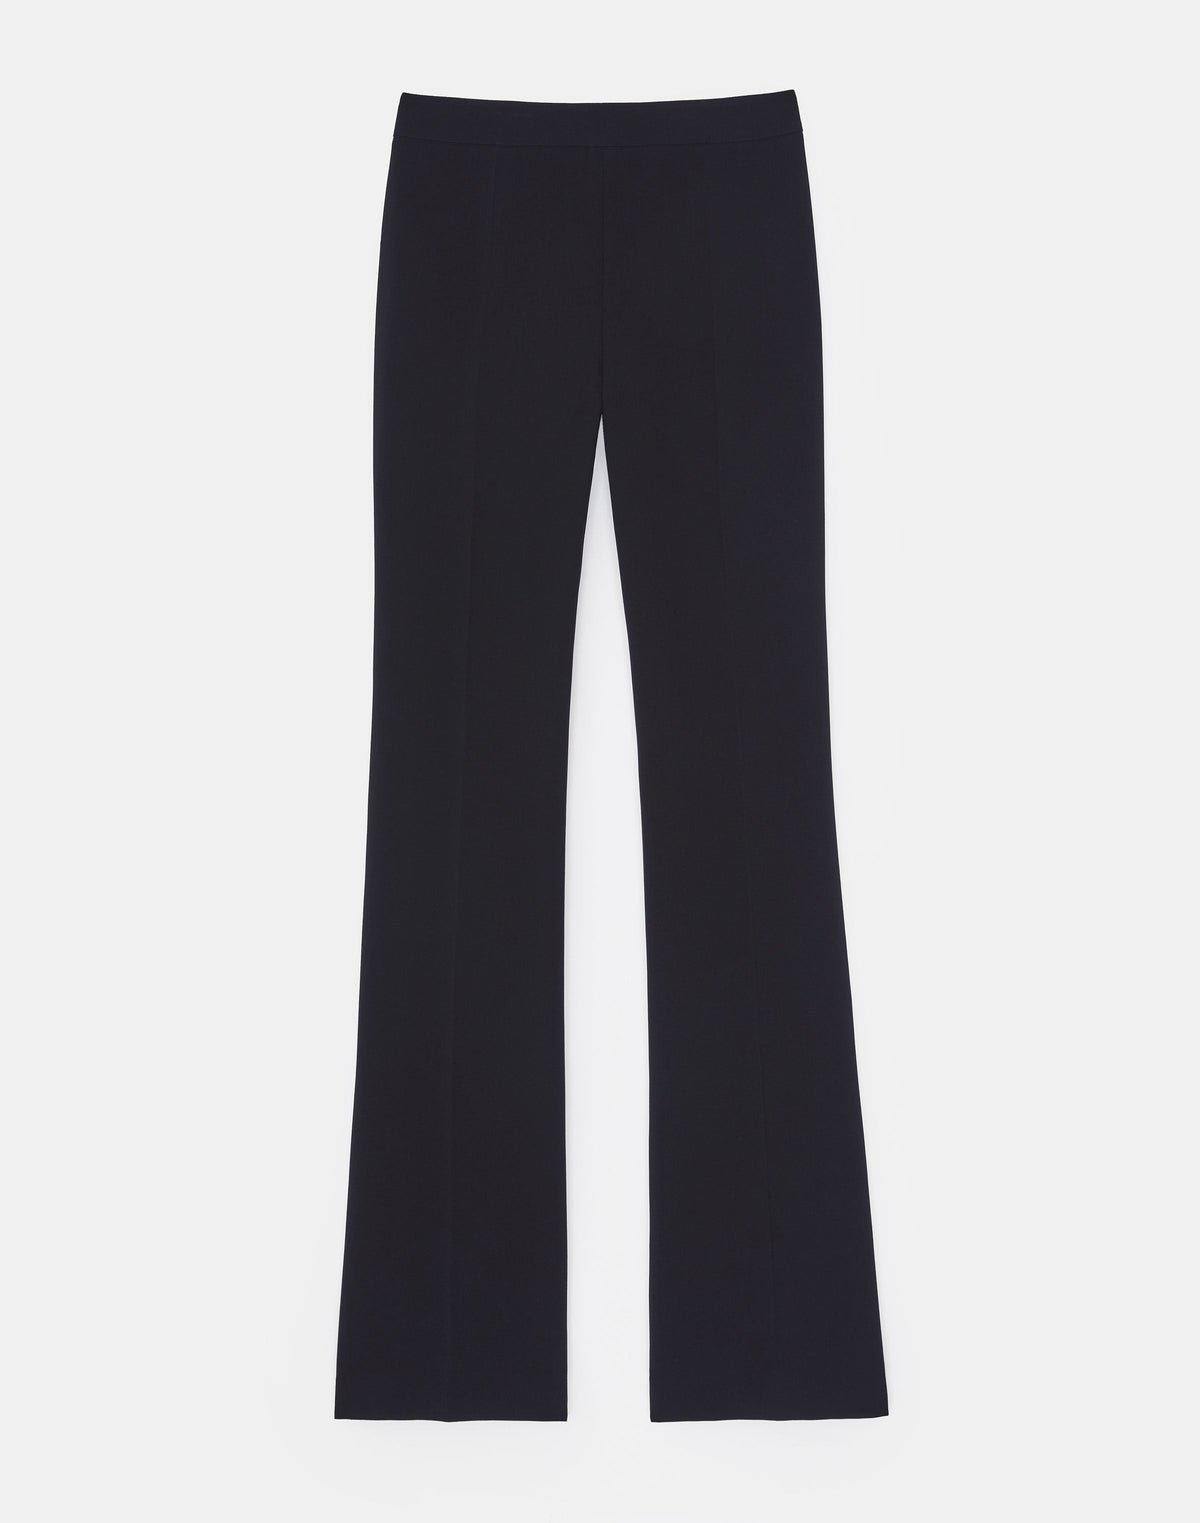 Finesse Crepe Gates Side-Zip Flared Pant LAFAYETTE 148